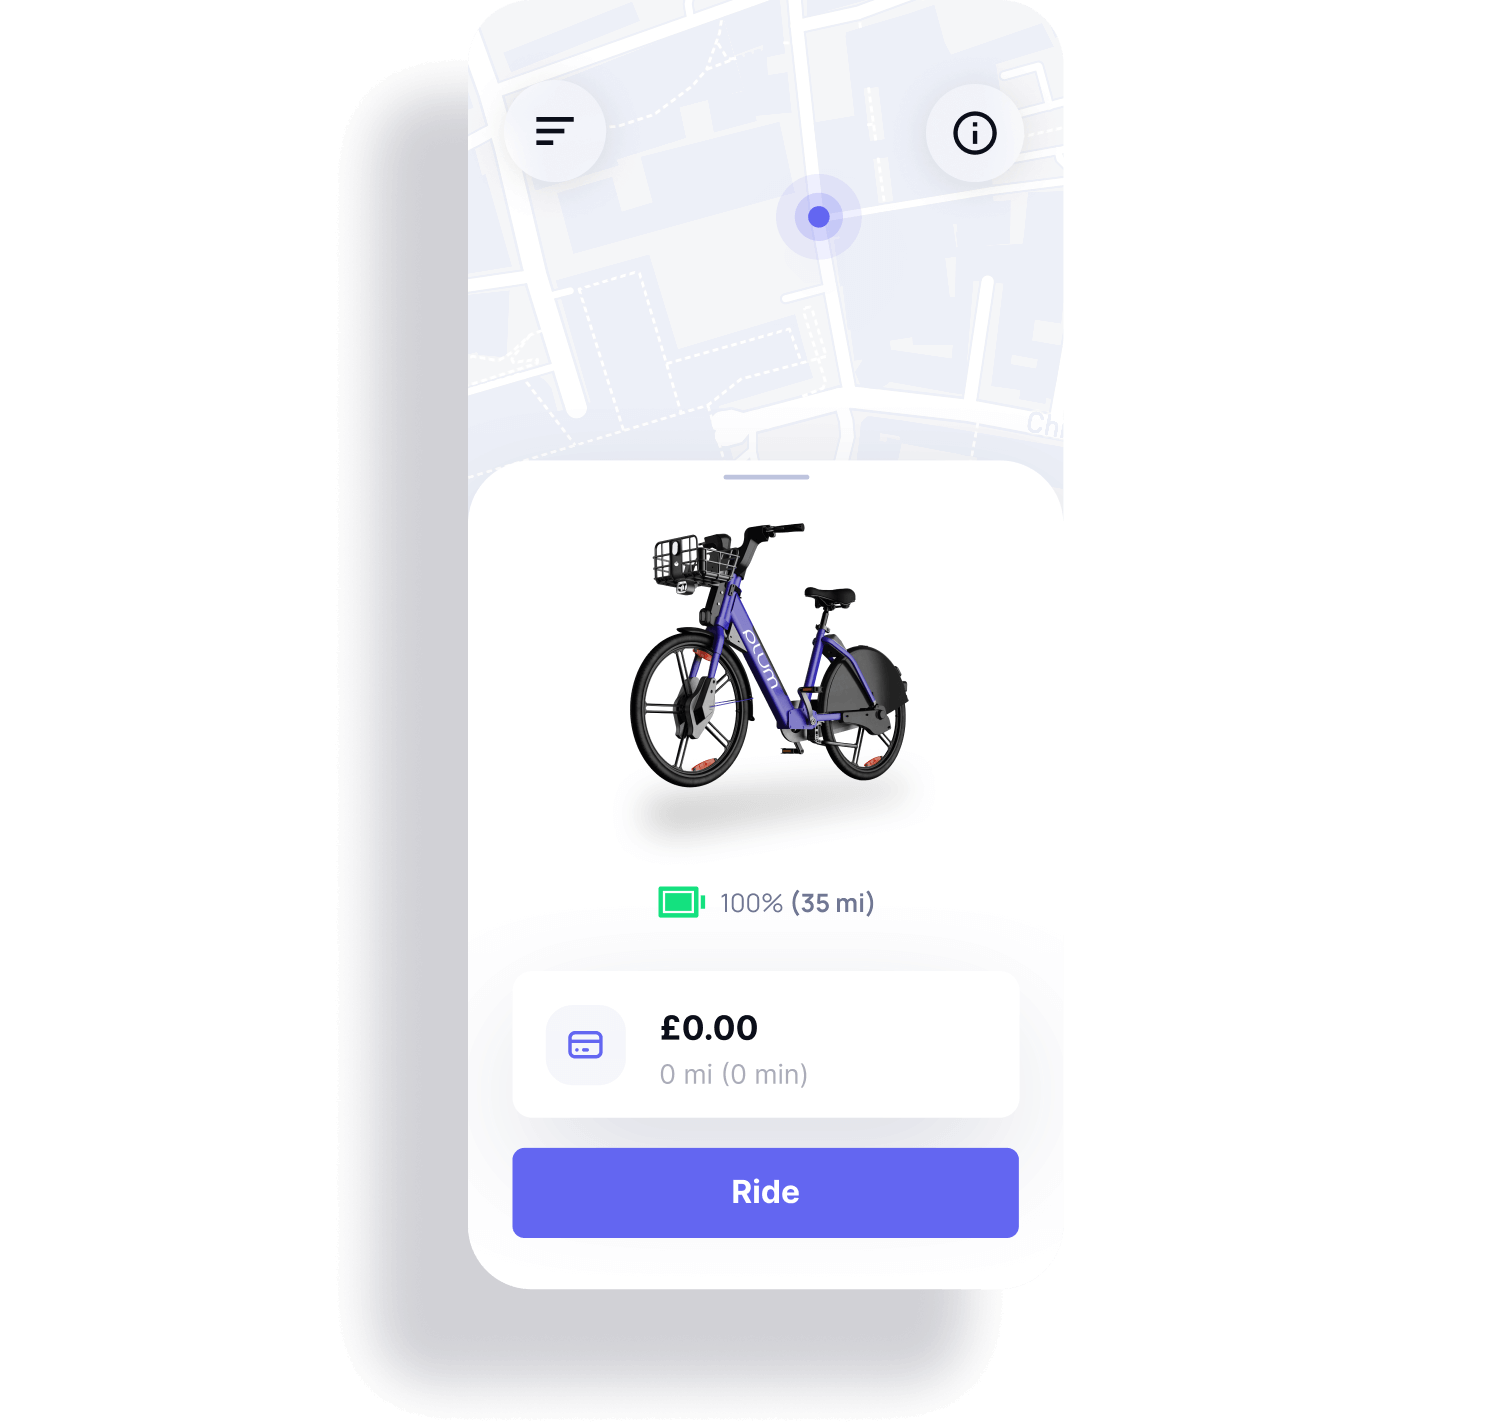 Phone screen displaying Plum rider app with a map, an e-bike, battery charge status, ride fare, and 'Ride' button visible